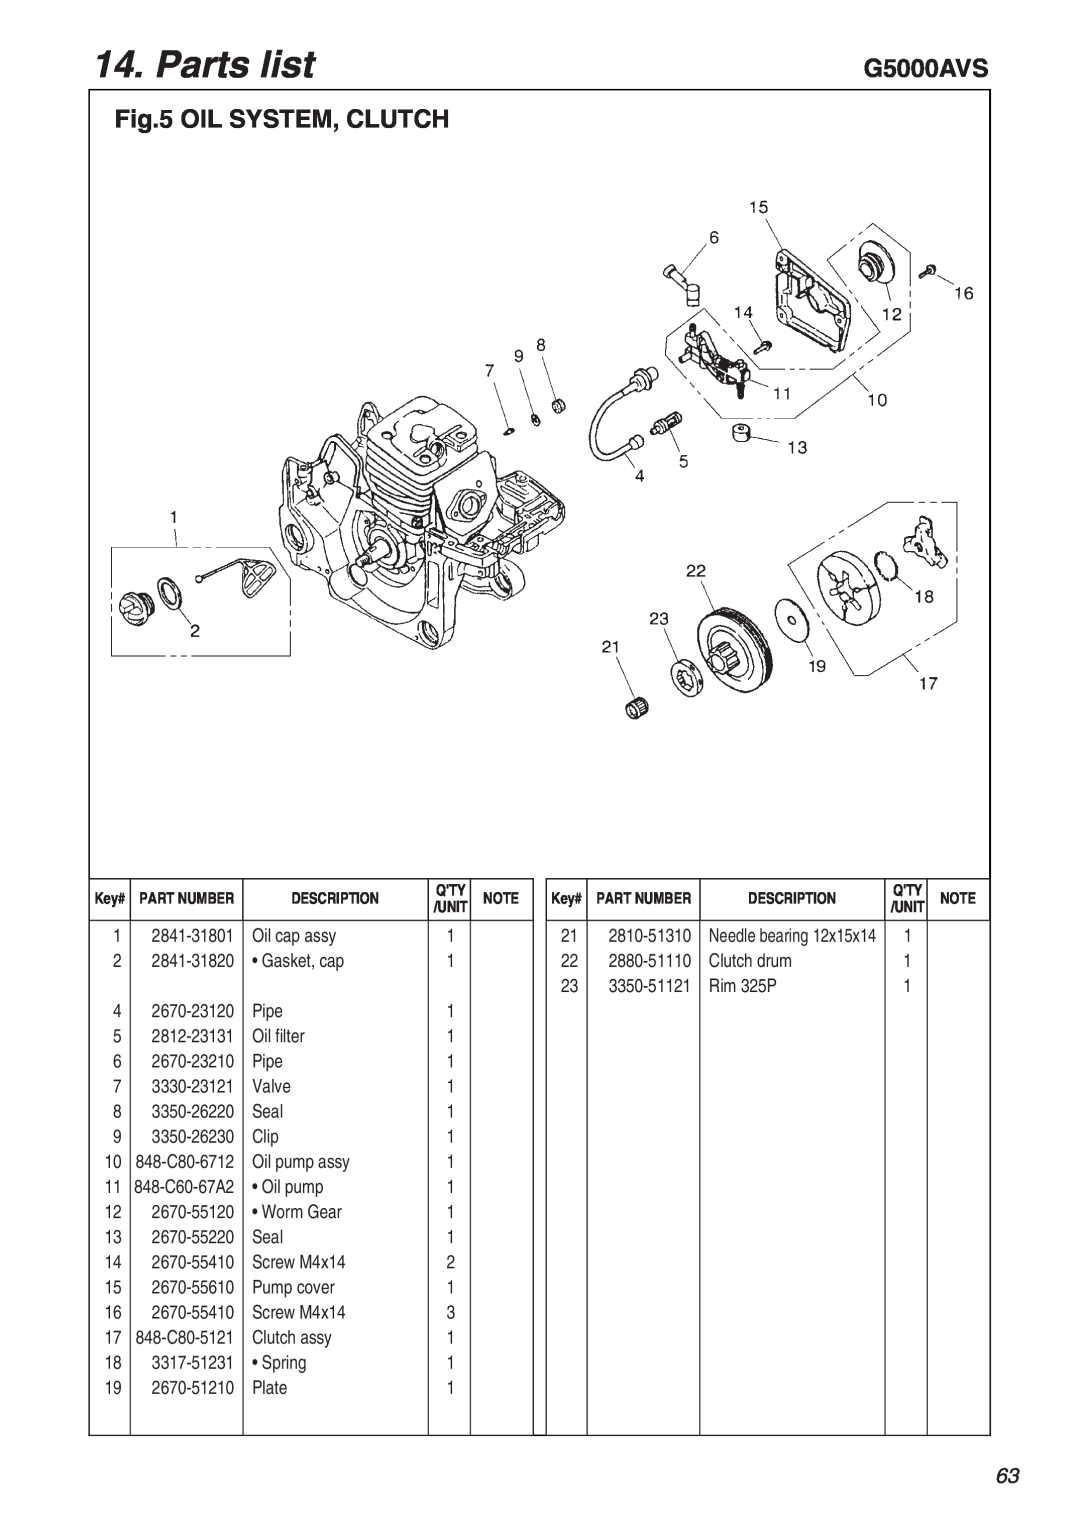 RedMax G5000AVS manual Oil System, Clutch, Parts list, 848-C80-6712, 848-C60-67A2, 848-C80-5121, Needle bearing 